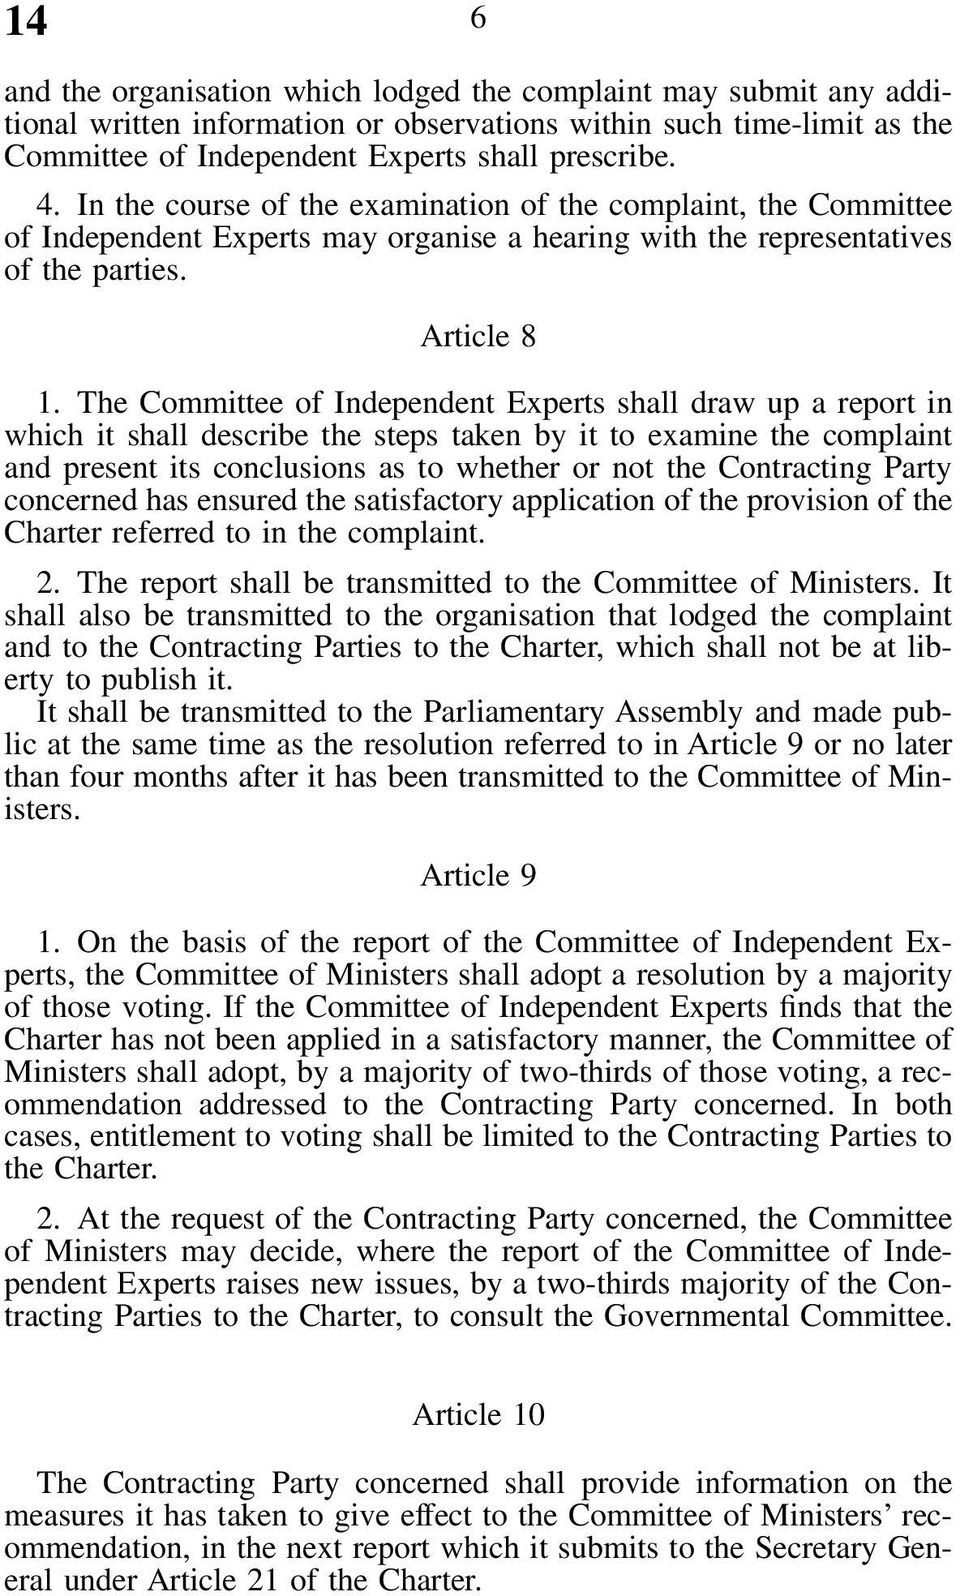 The Committee of Independent Experts shall draw up a report in which it shall describe the steps taken by it to examine the complaint and present its conclusions as to whether or not the Contracting